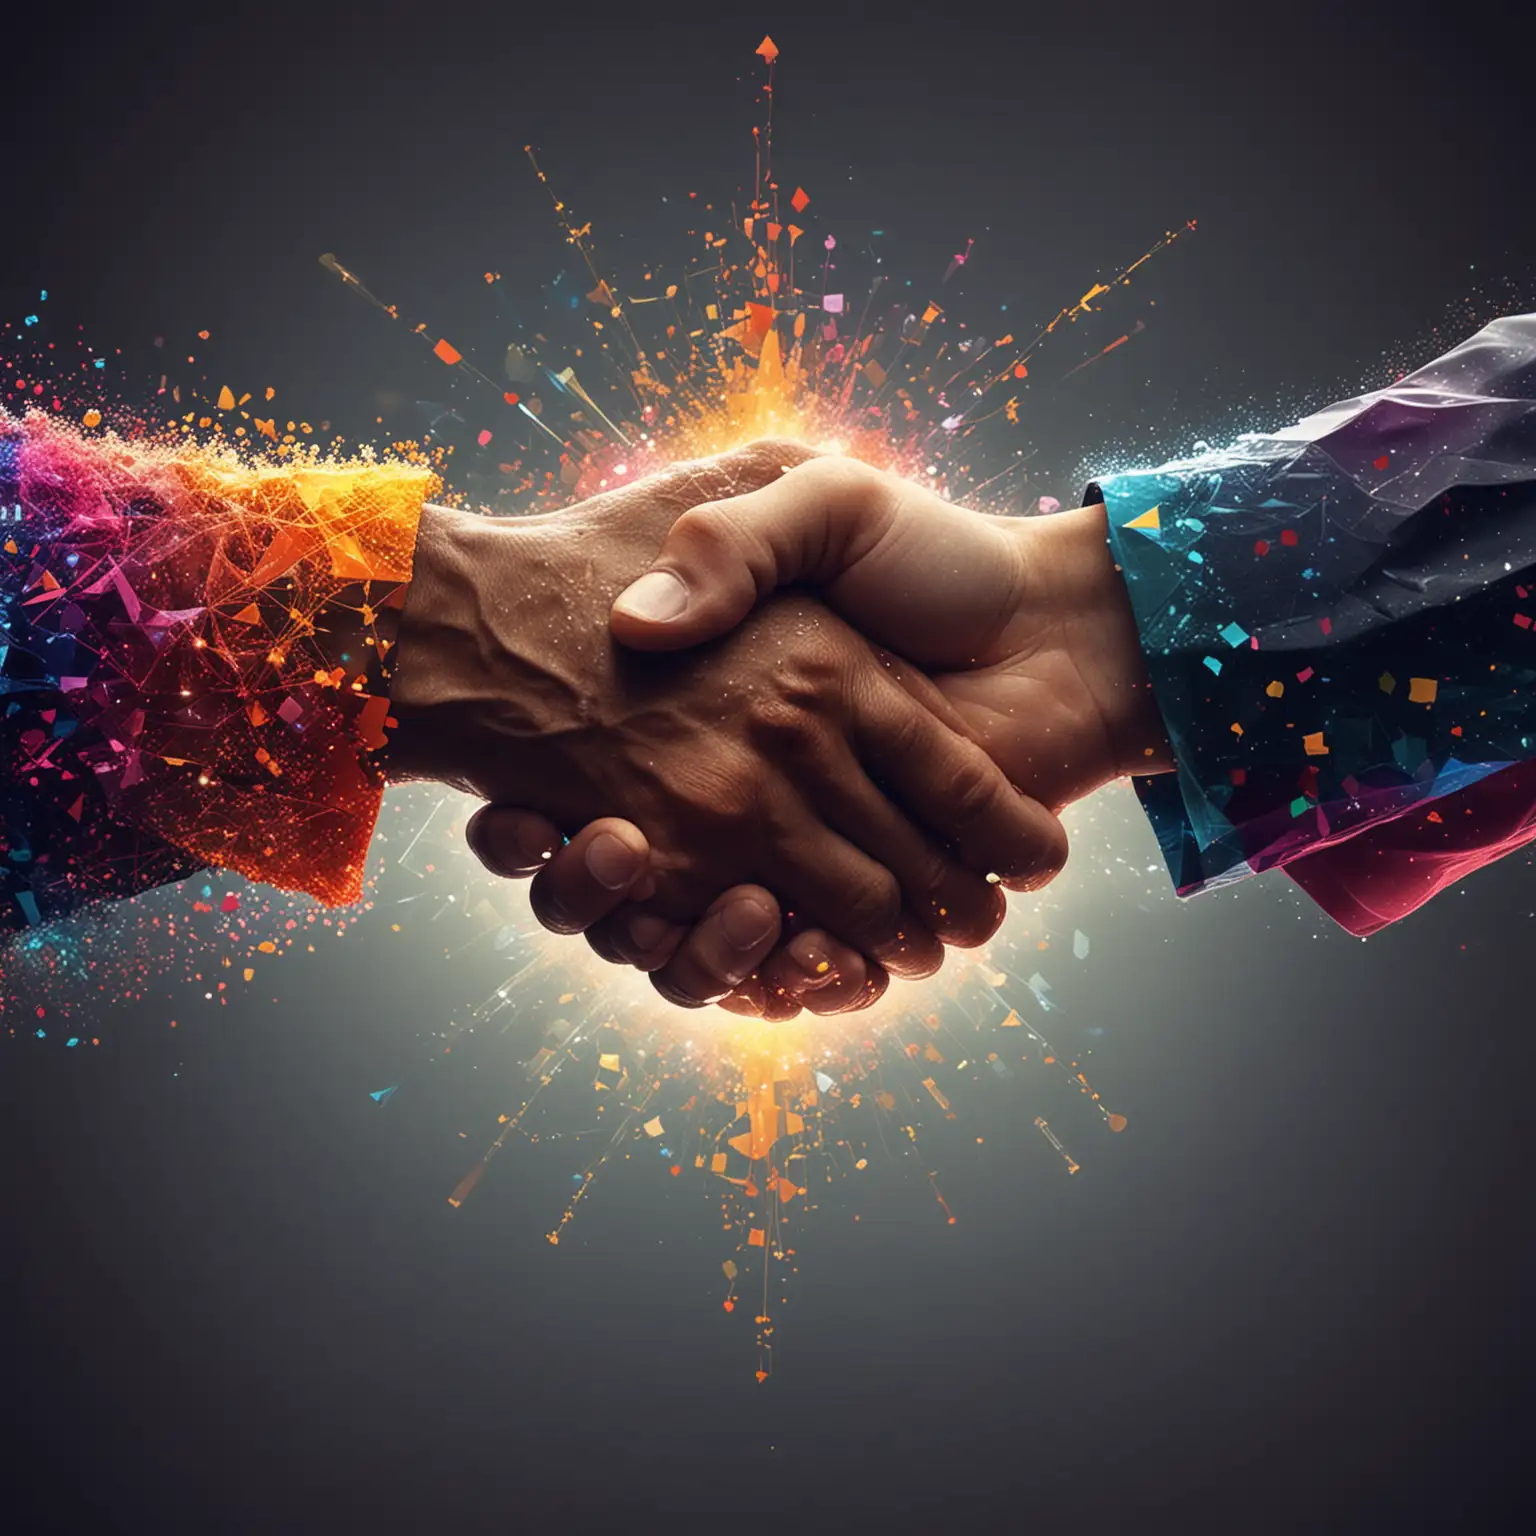 image of a handshake made out of dynamic, colorful particles or geometric shapes, symbolizing strong partnerships and quality.